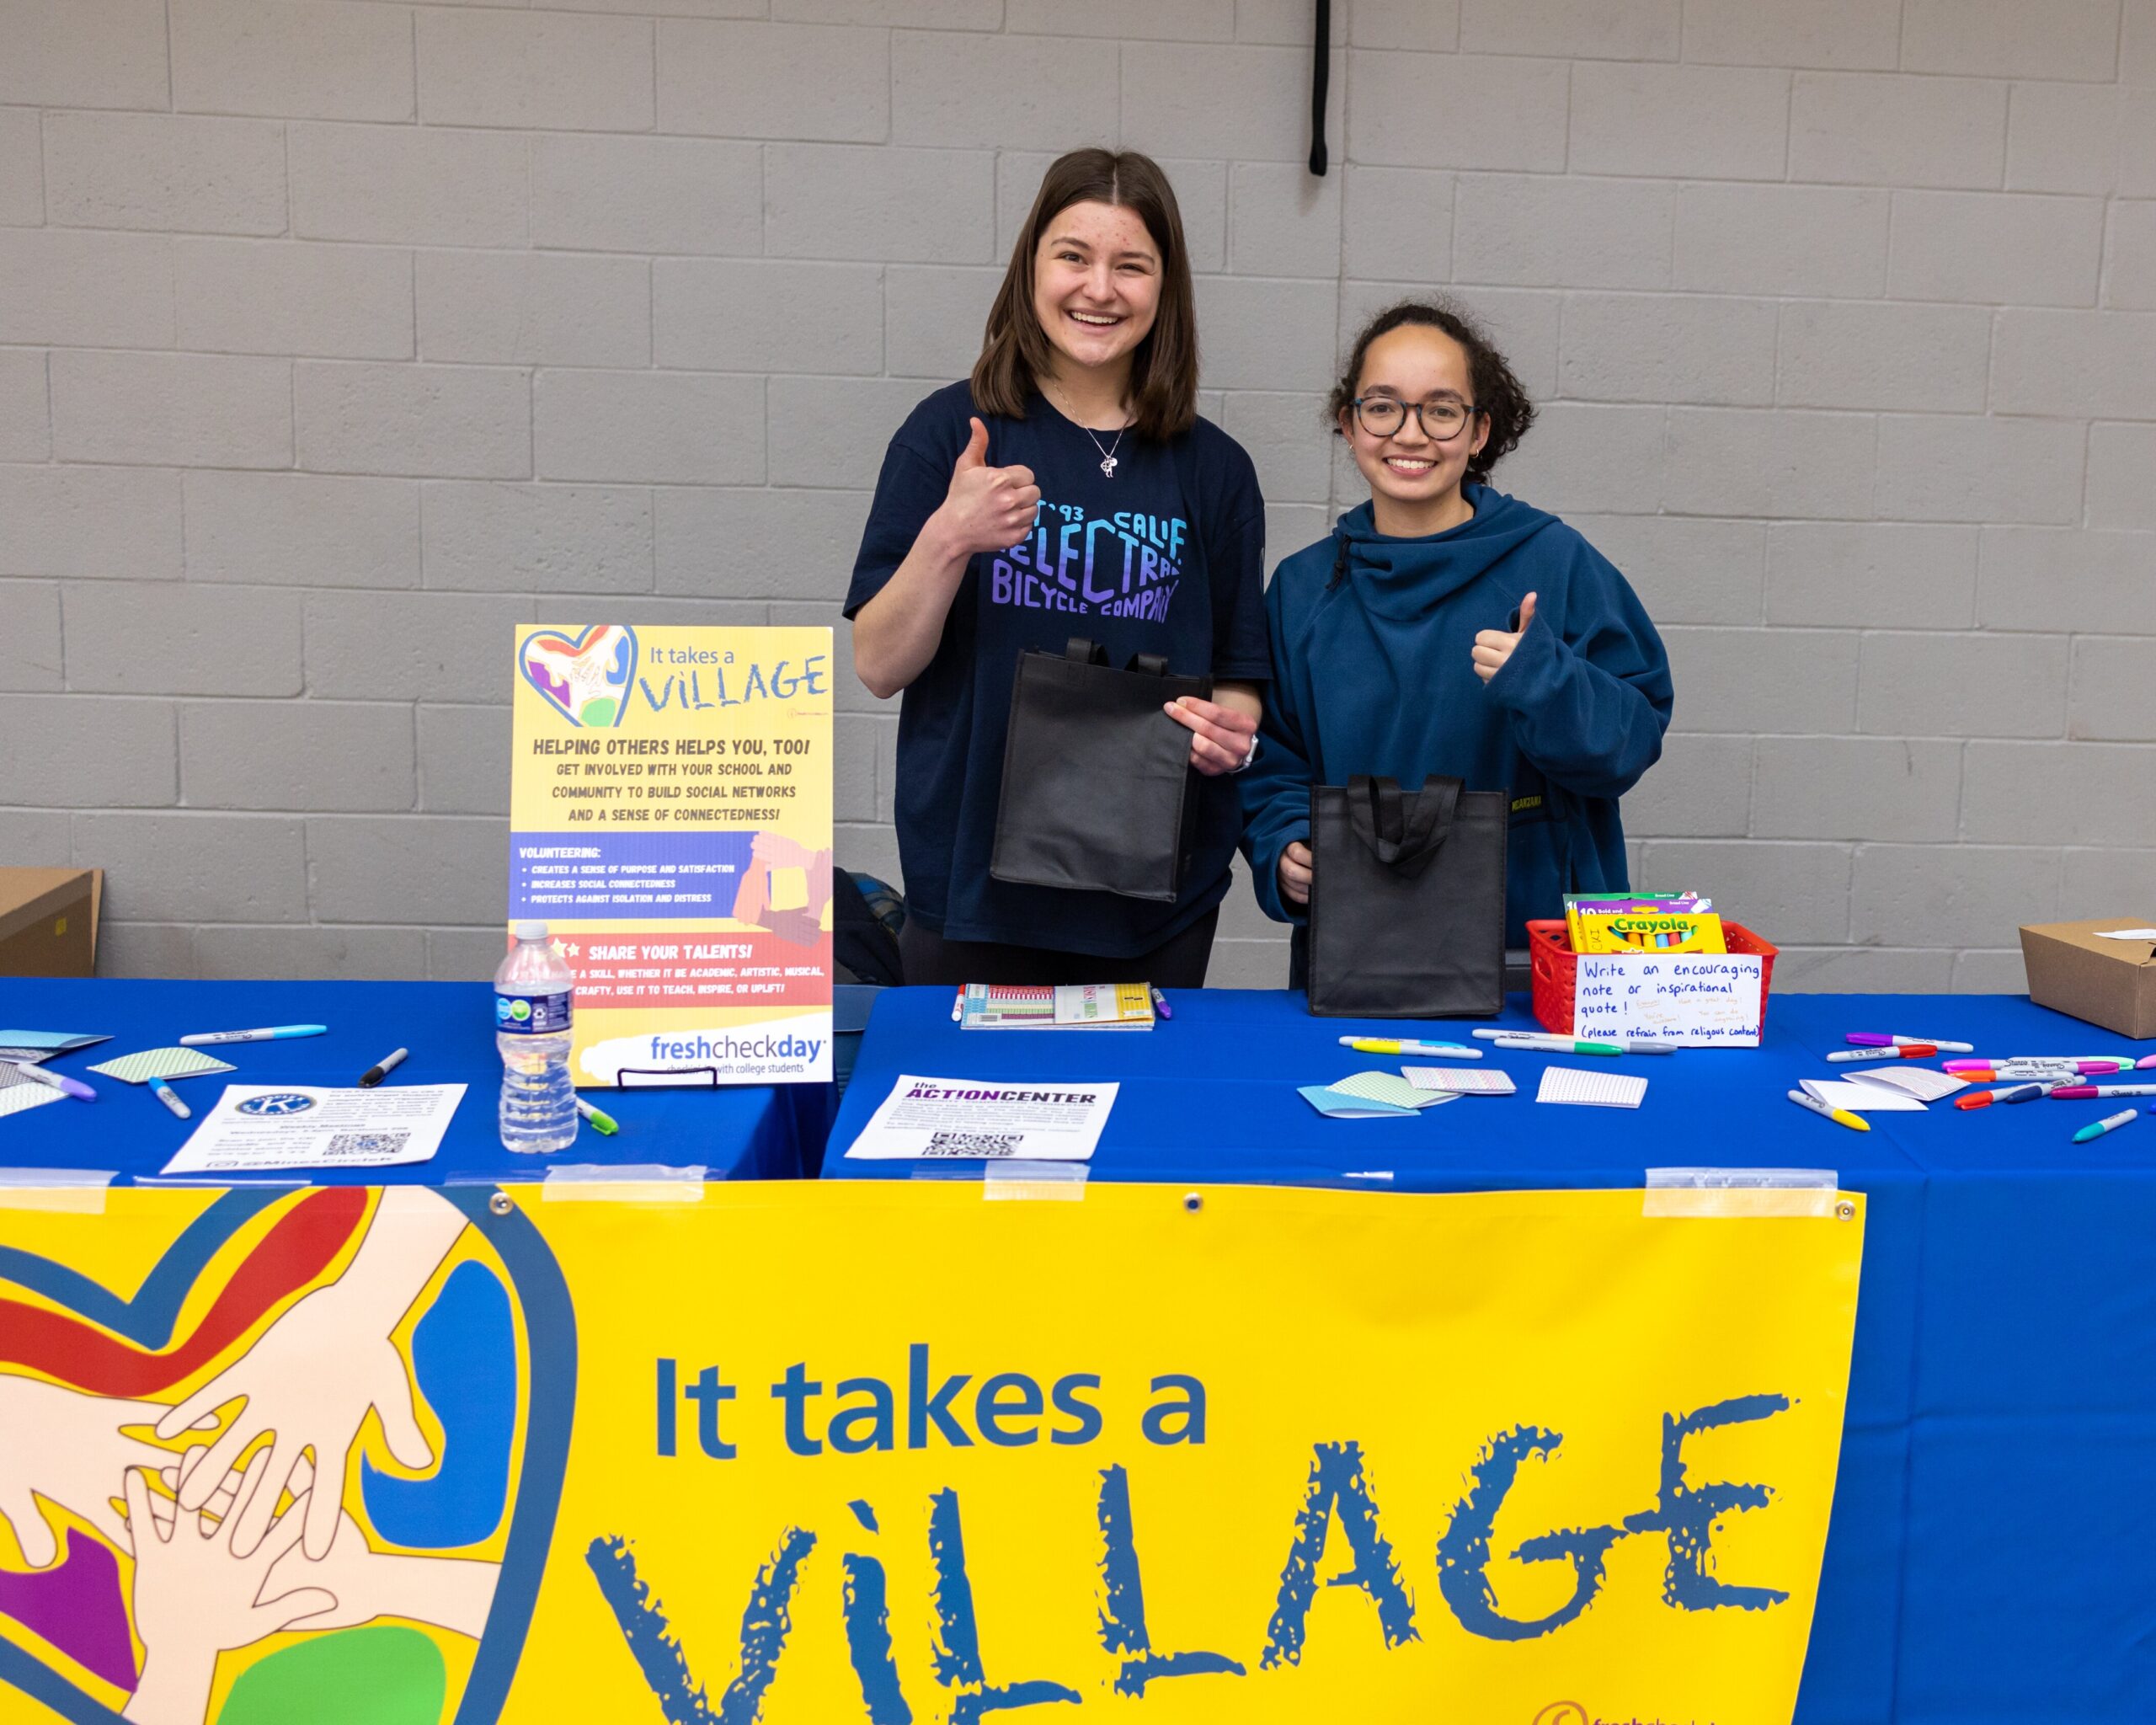 Two students have their thumbs up at the "It Takes a Village" booth.